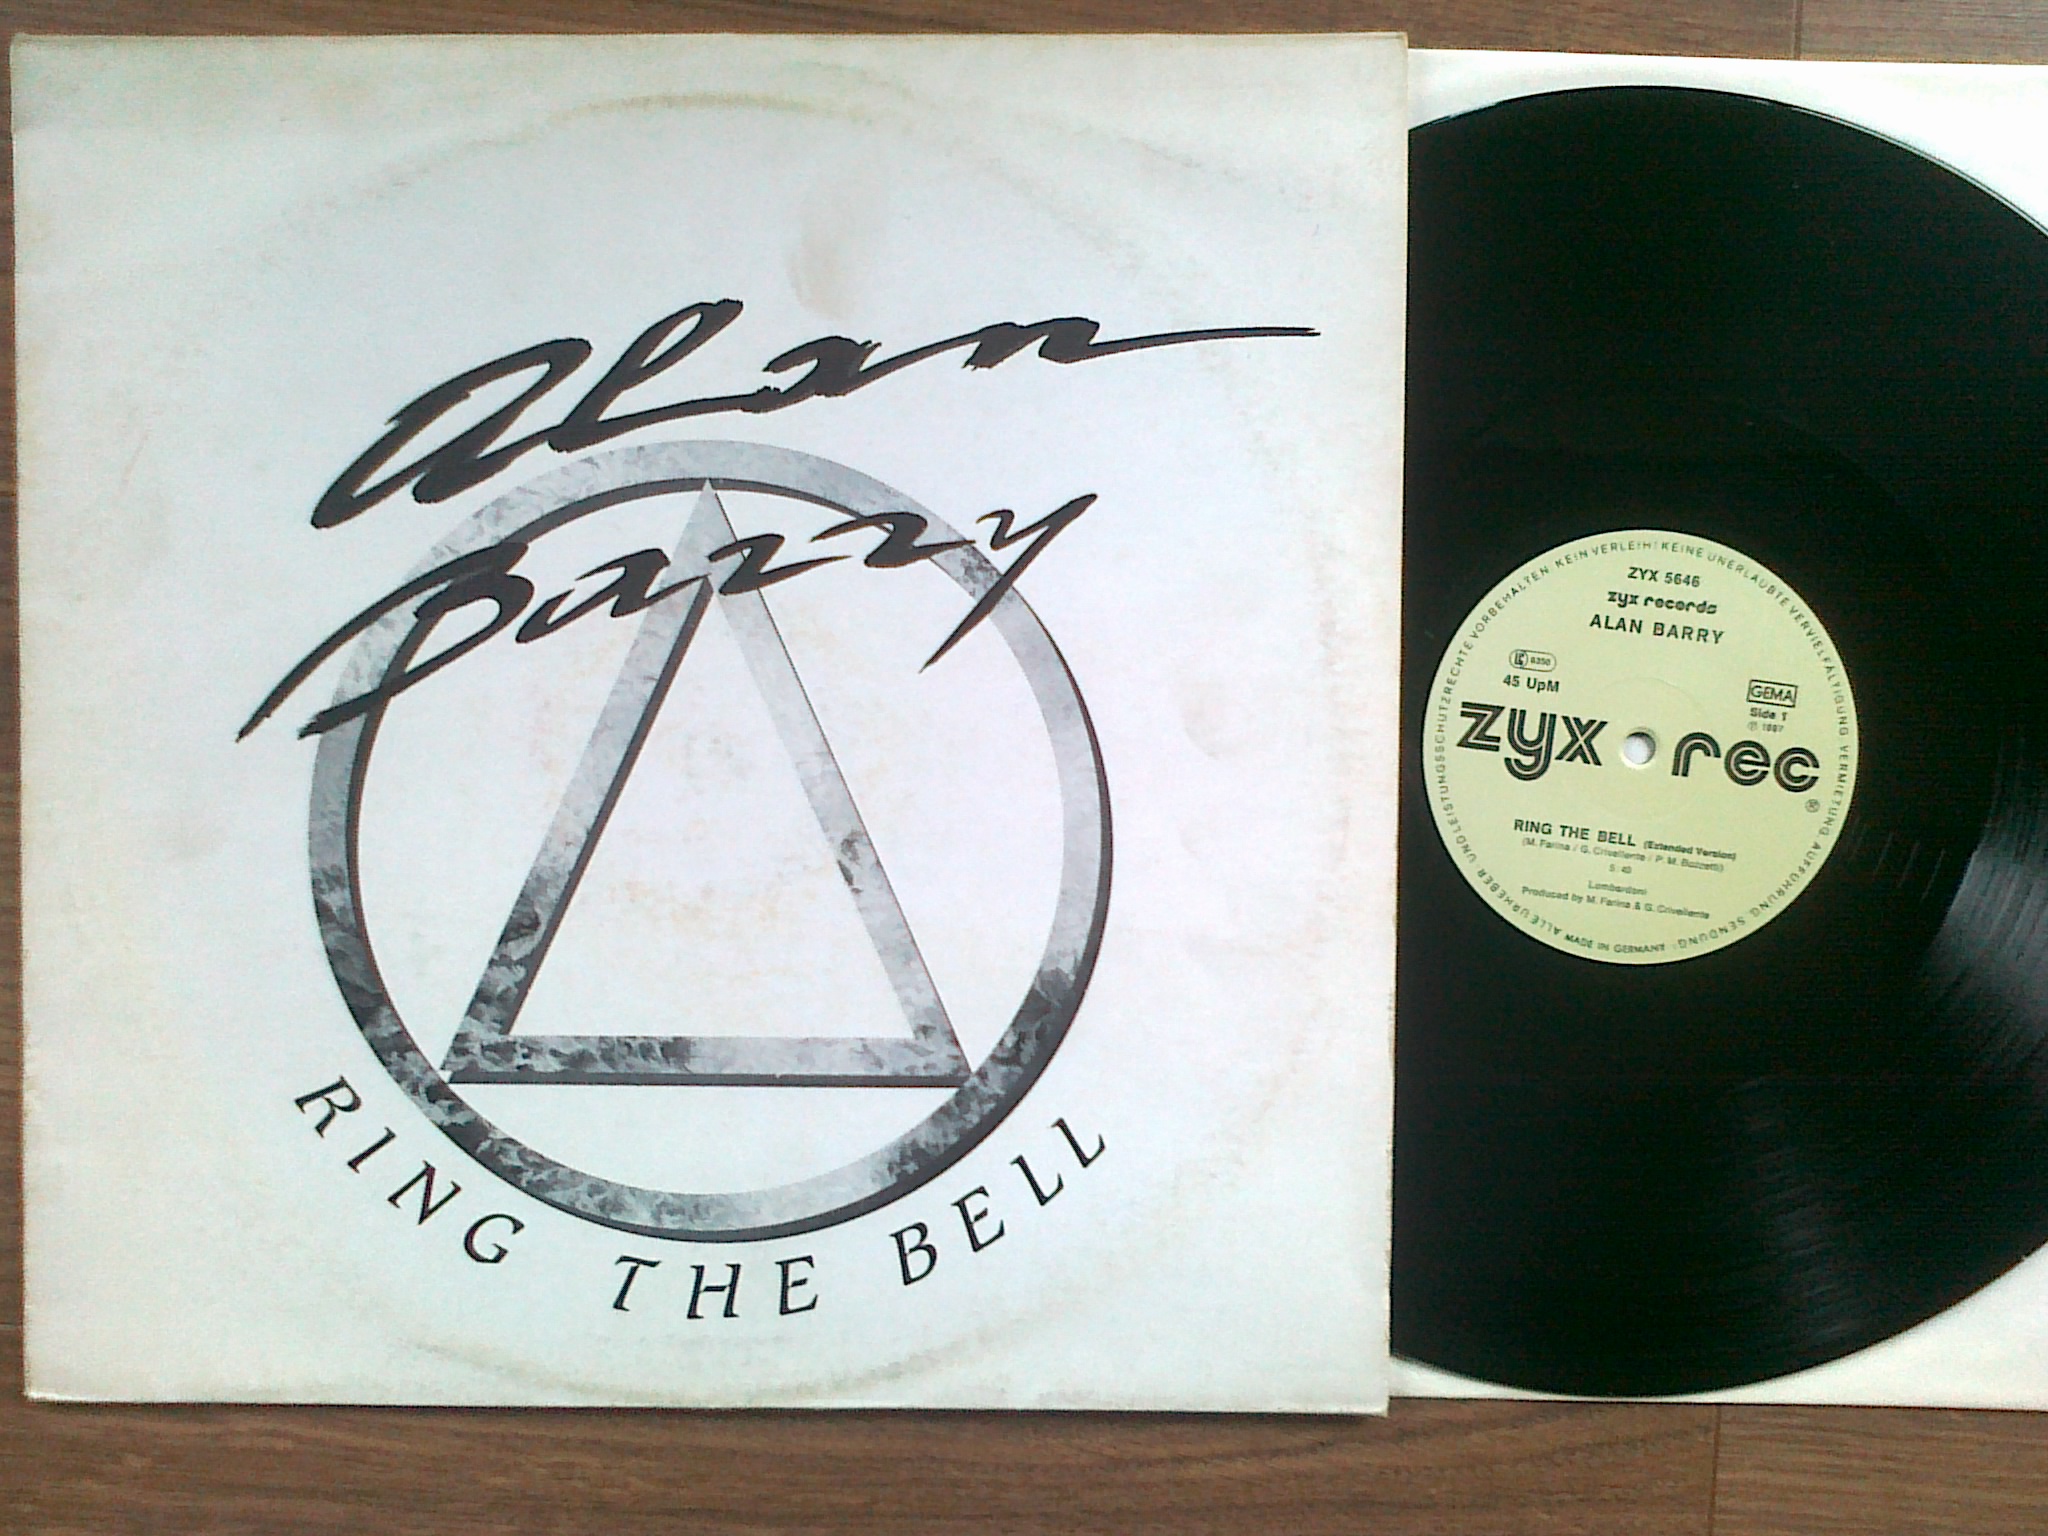 Alan Barry - Ring the Bell